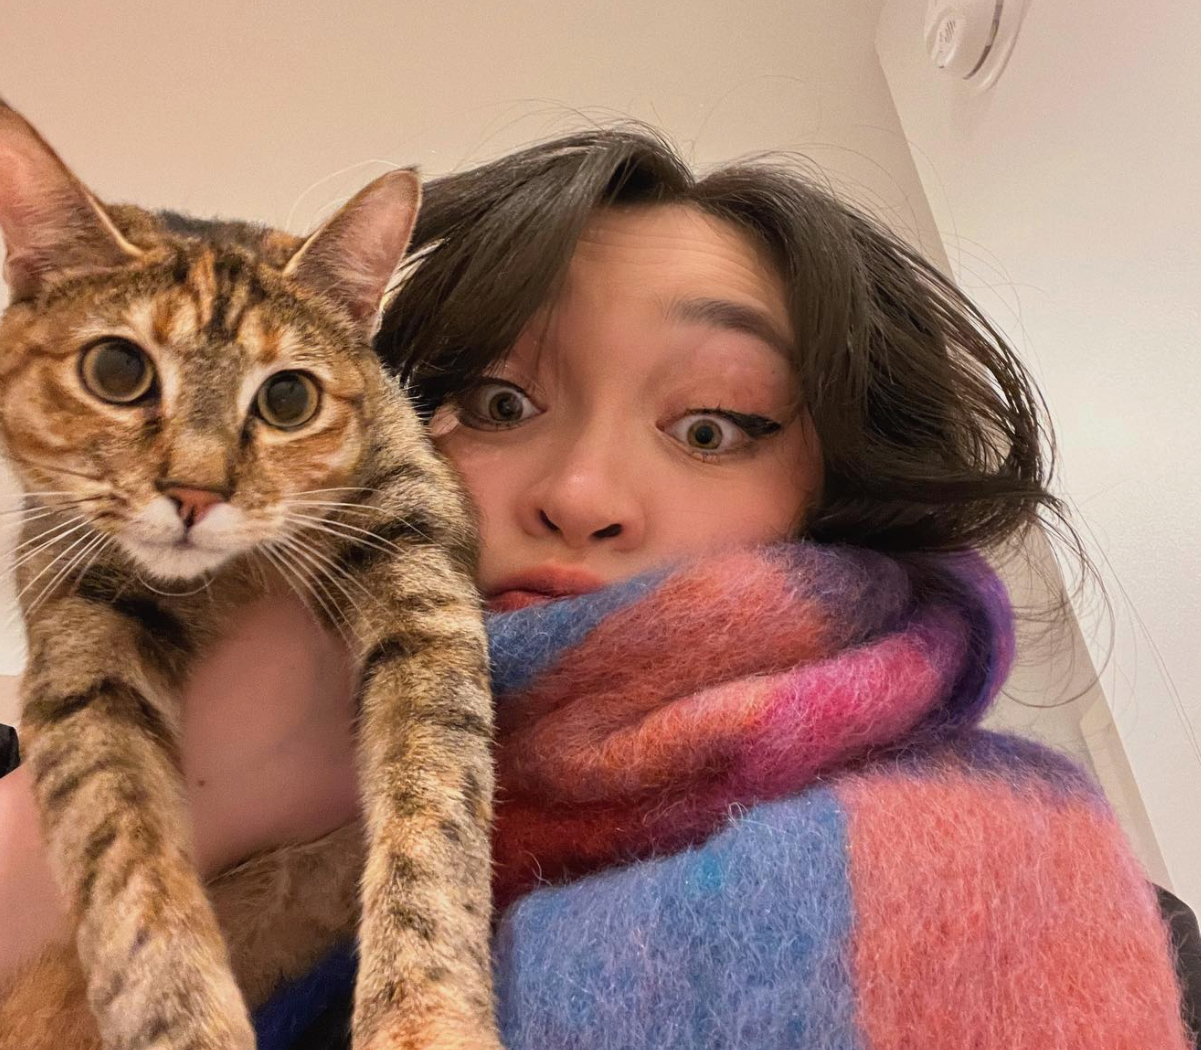 Maia with her pet cat